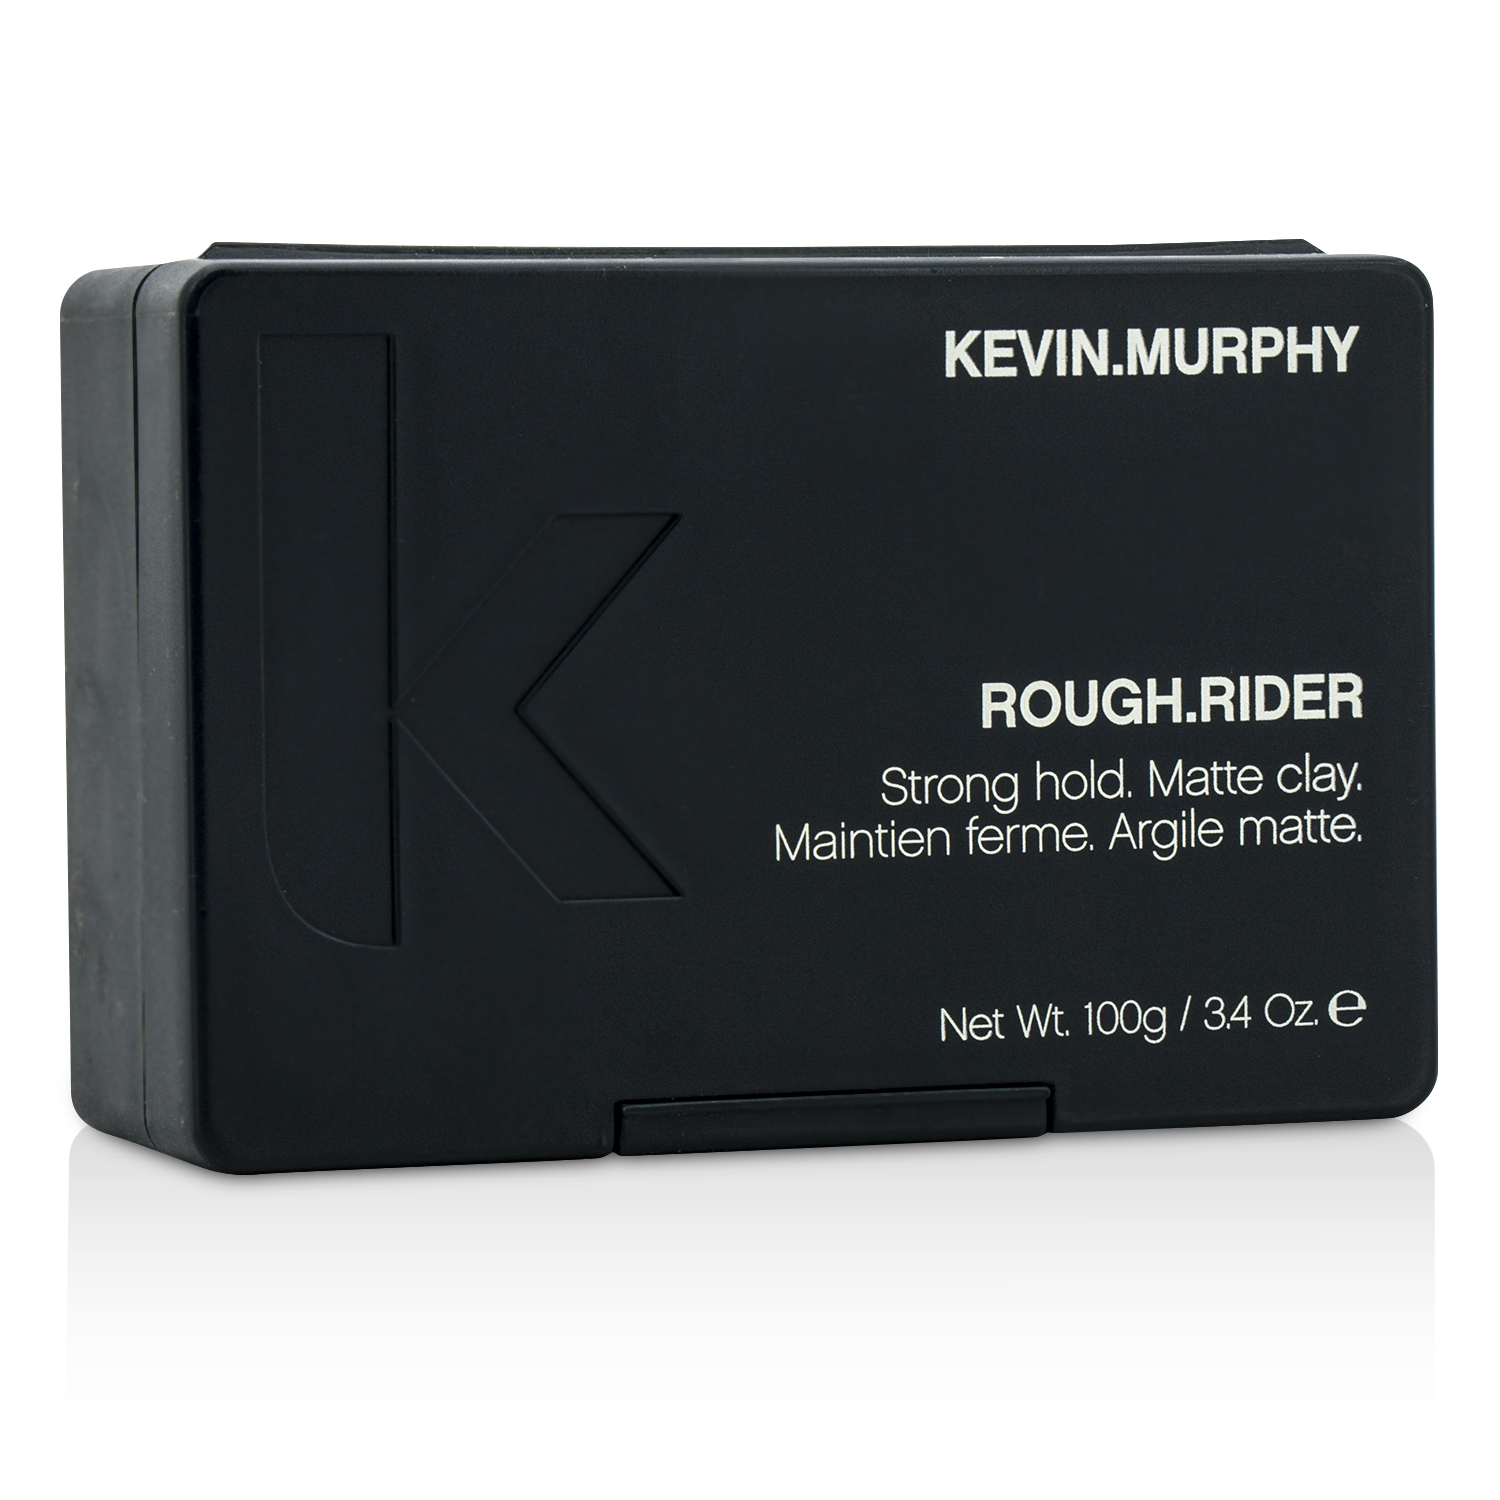 Rough.Rider Strong Hold. Matte Clay Kevin.Murphy Image